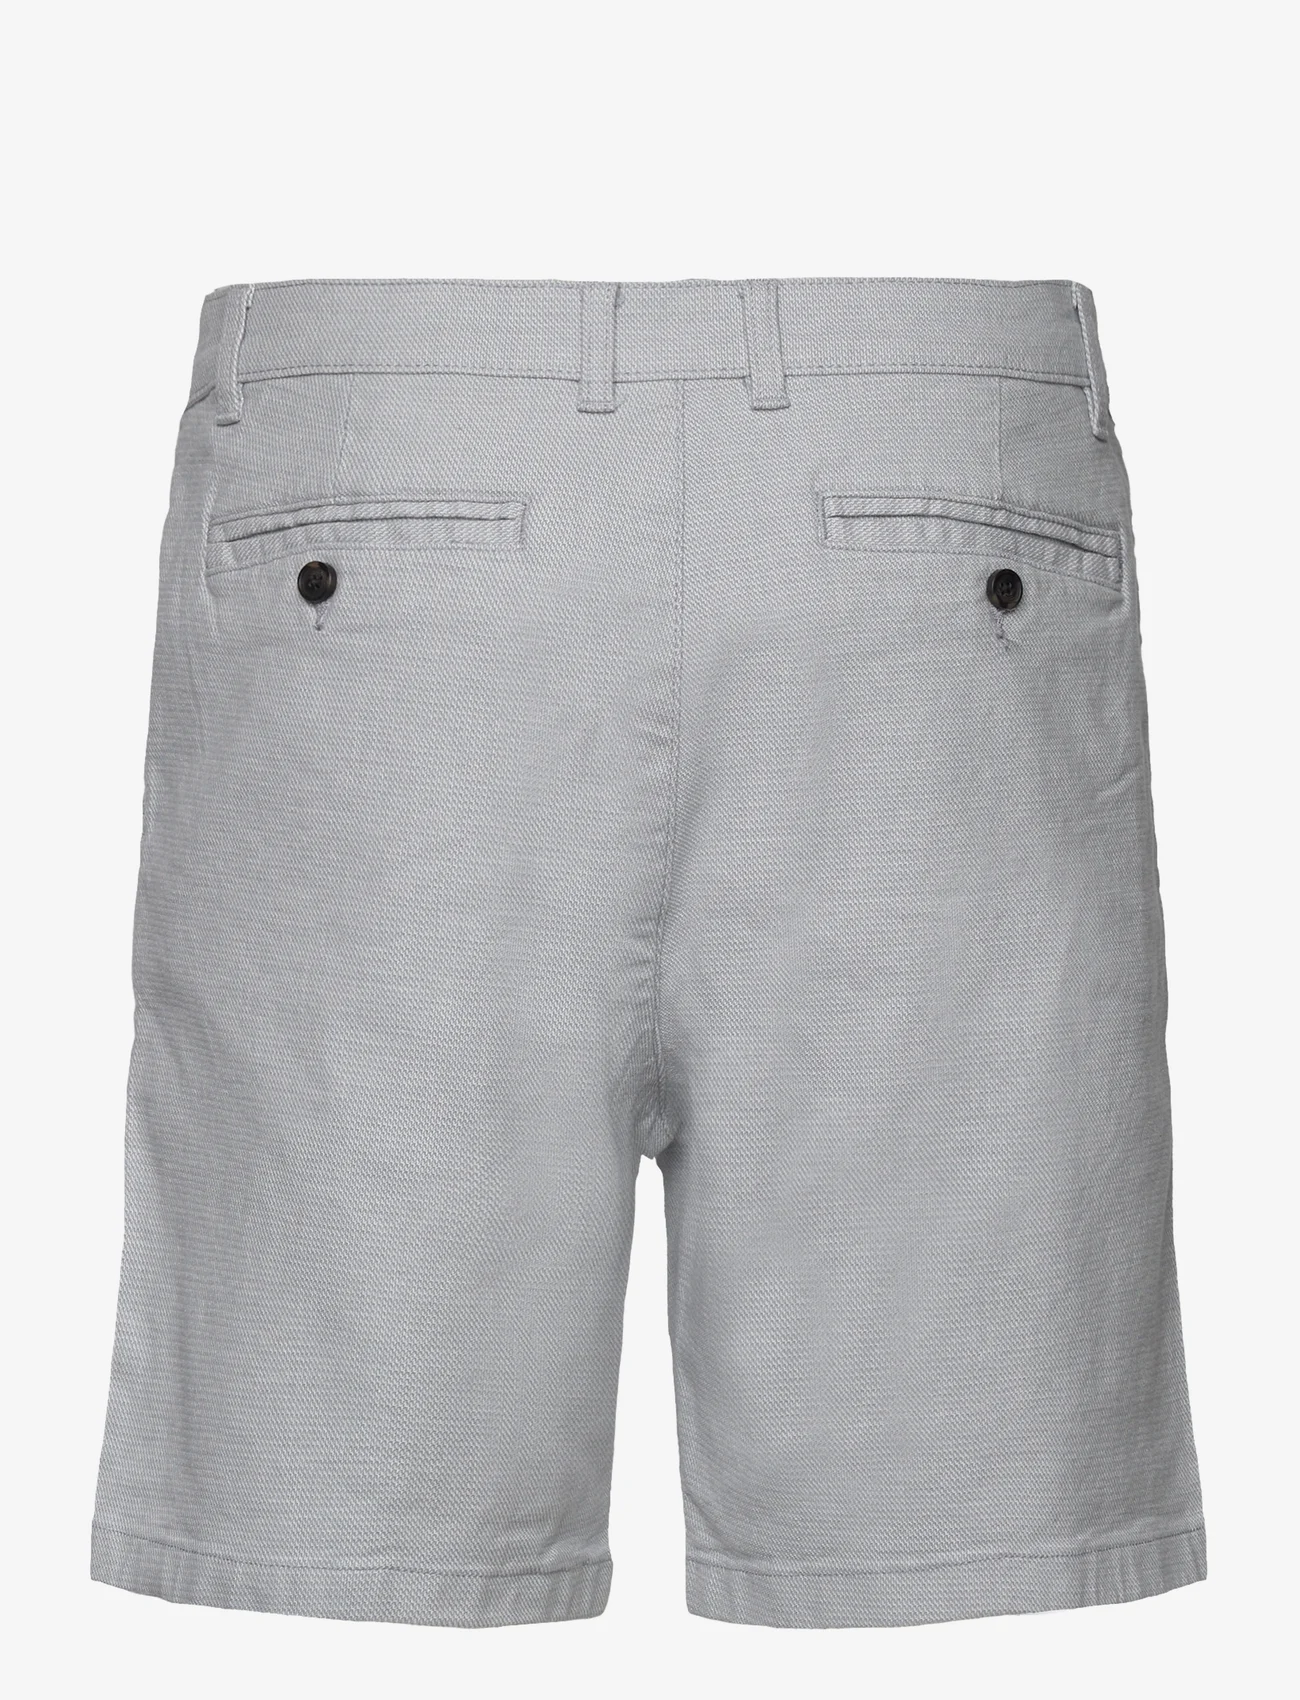 Selected Homme - SLHCOMFORT-FELIX SHORTS W CAMP - lowest prices - tradewinds - 1